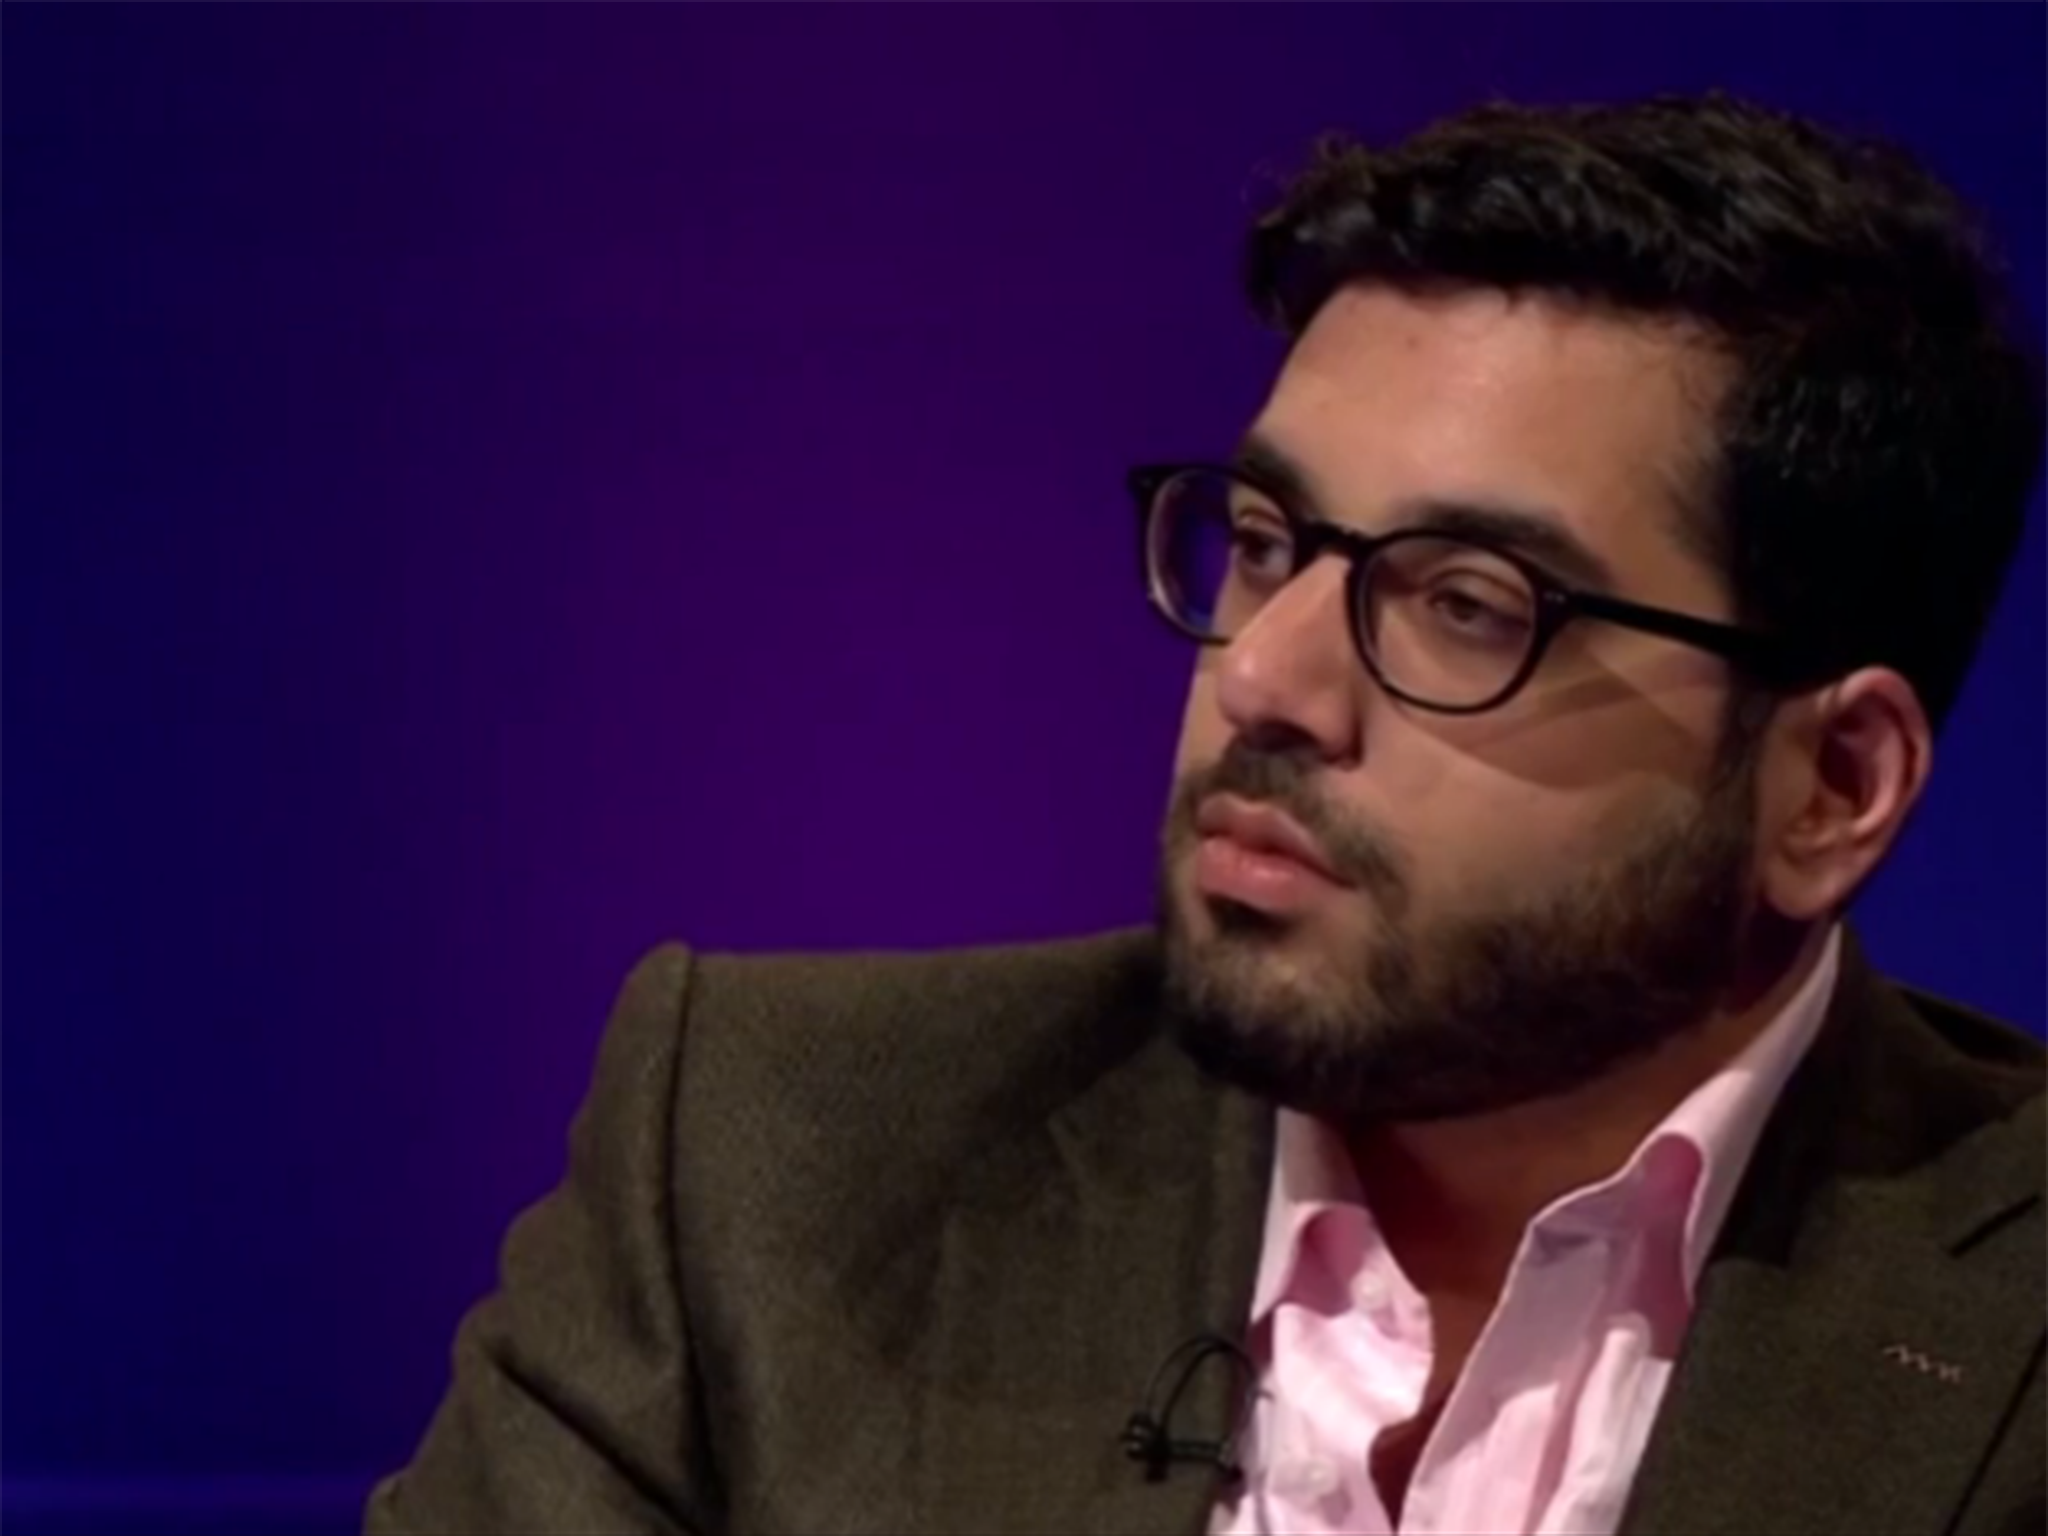 Mr Kassam quit Ukip in the summer and then rejoined the party